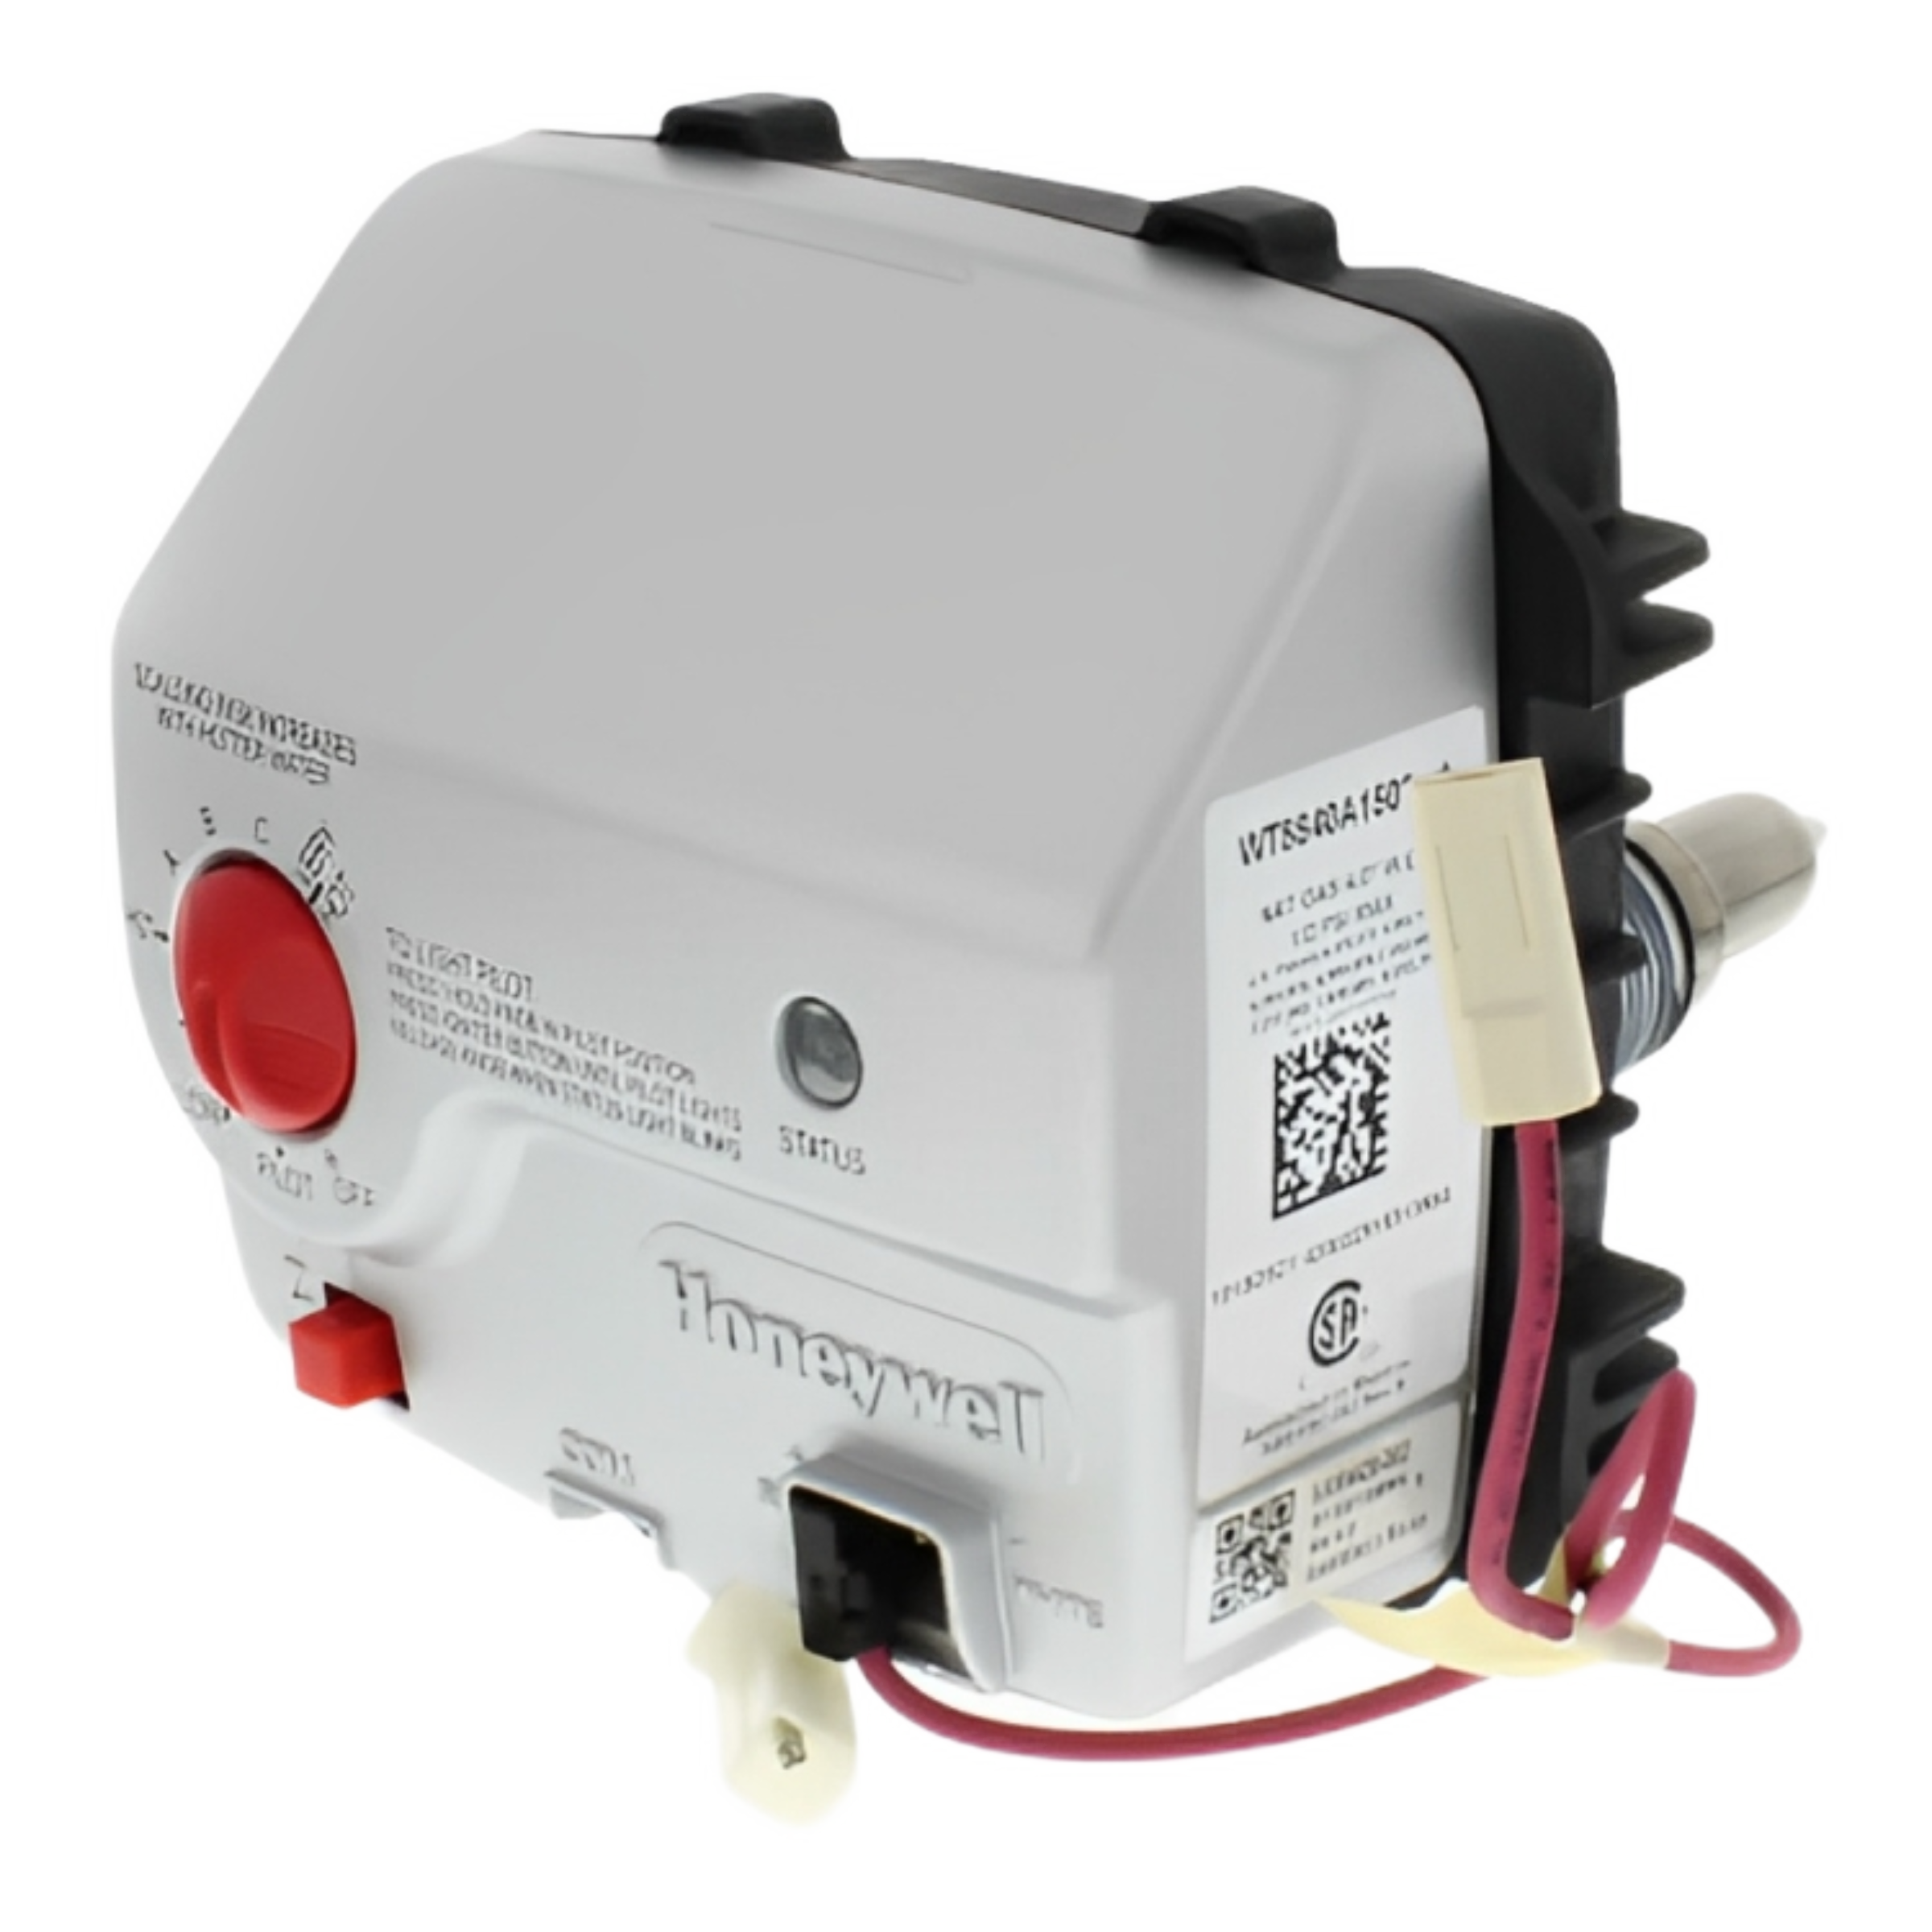 WT8840A1500 Honeywell Home Trade Replacement Gas Valve for Bradford White Standard NoX Water Heaters with 2" Insulation, 4" WC Setting, Max. Capacity 75ft3/hr